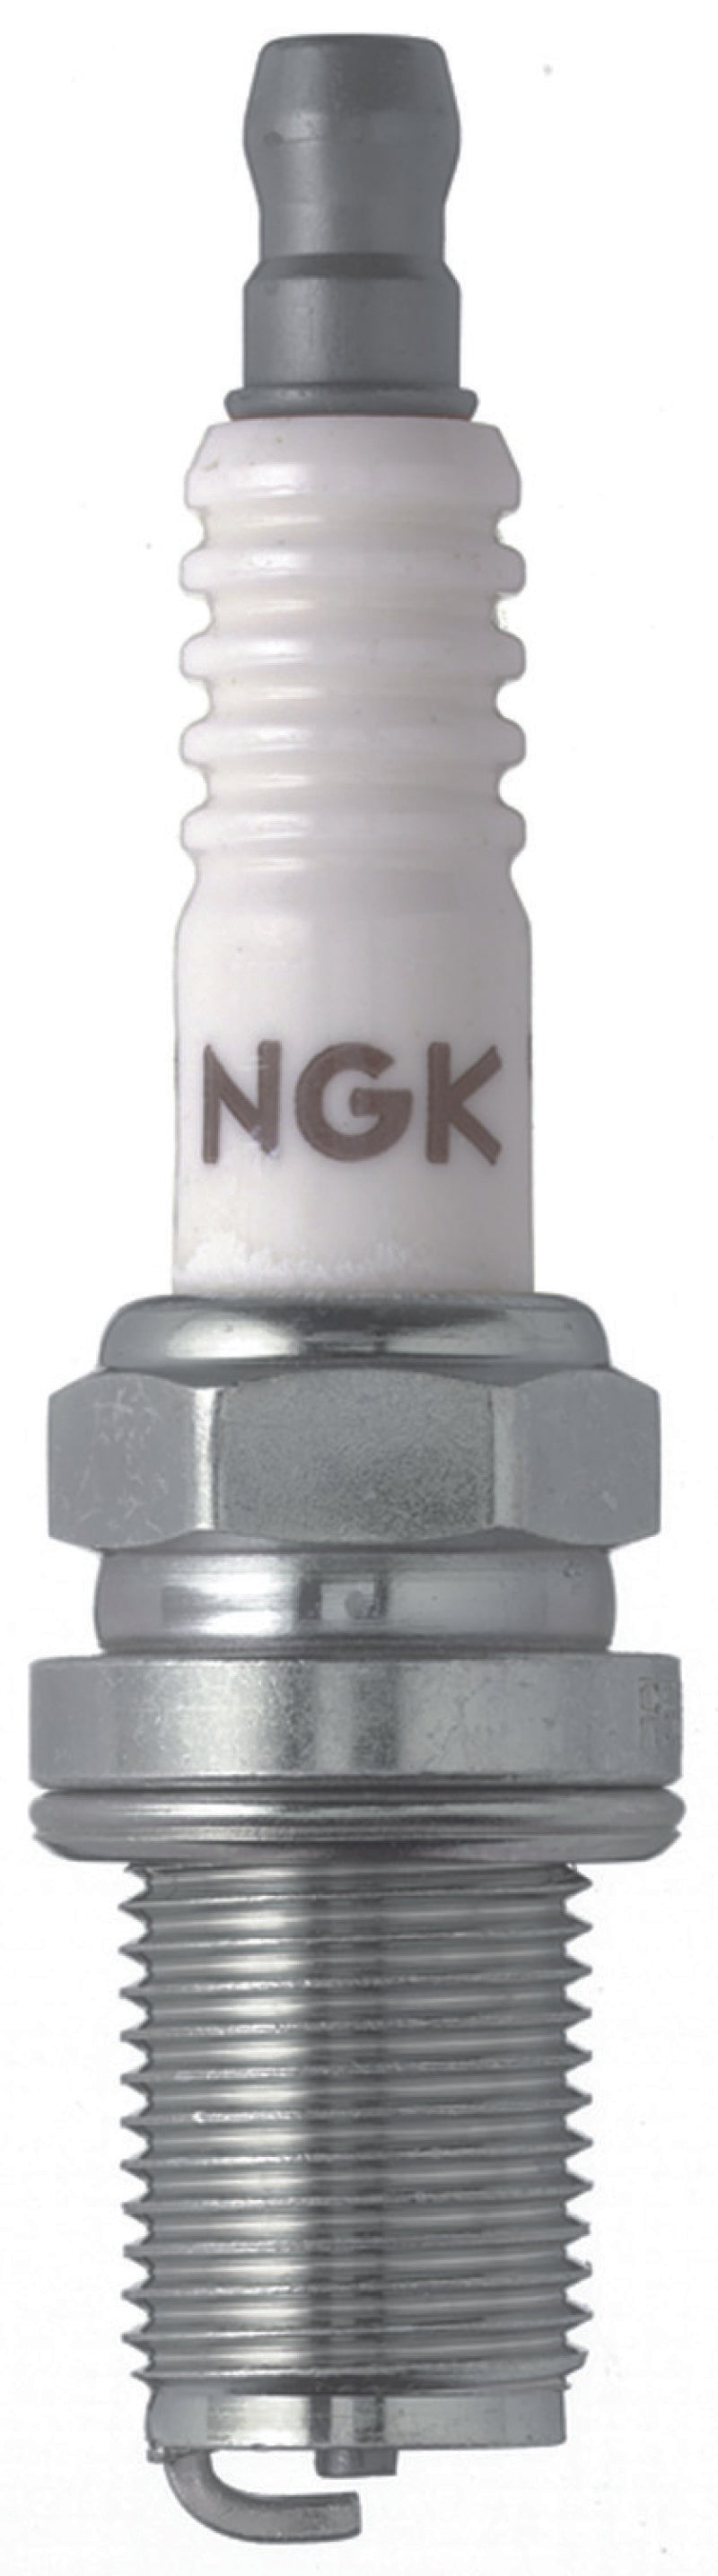 NGK Racing Spark Plug Box of 4 (R5671A-8) -  Shop now at Performance Car Parts